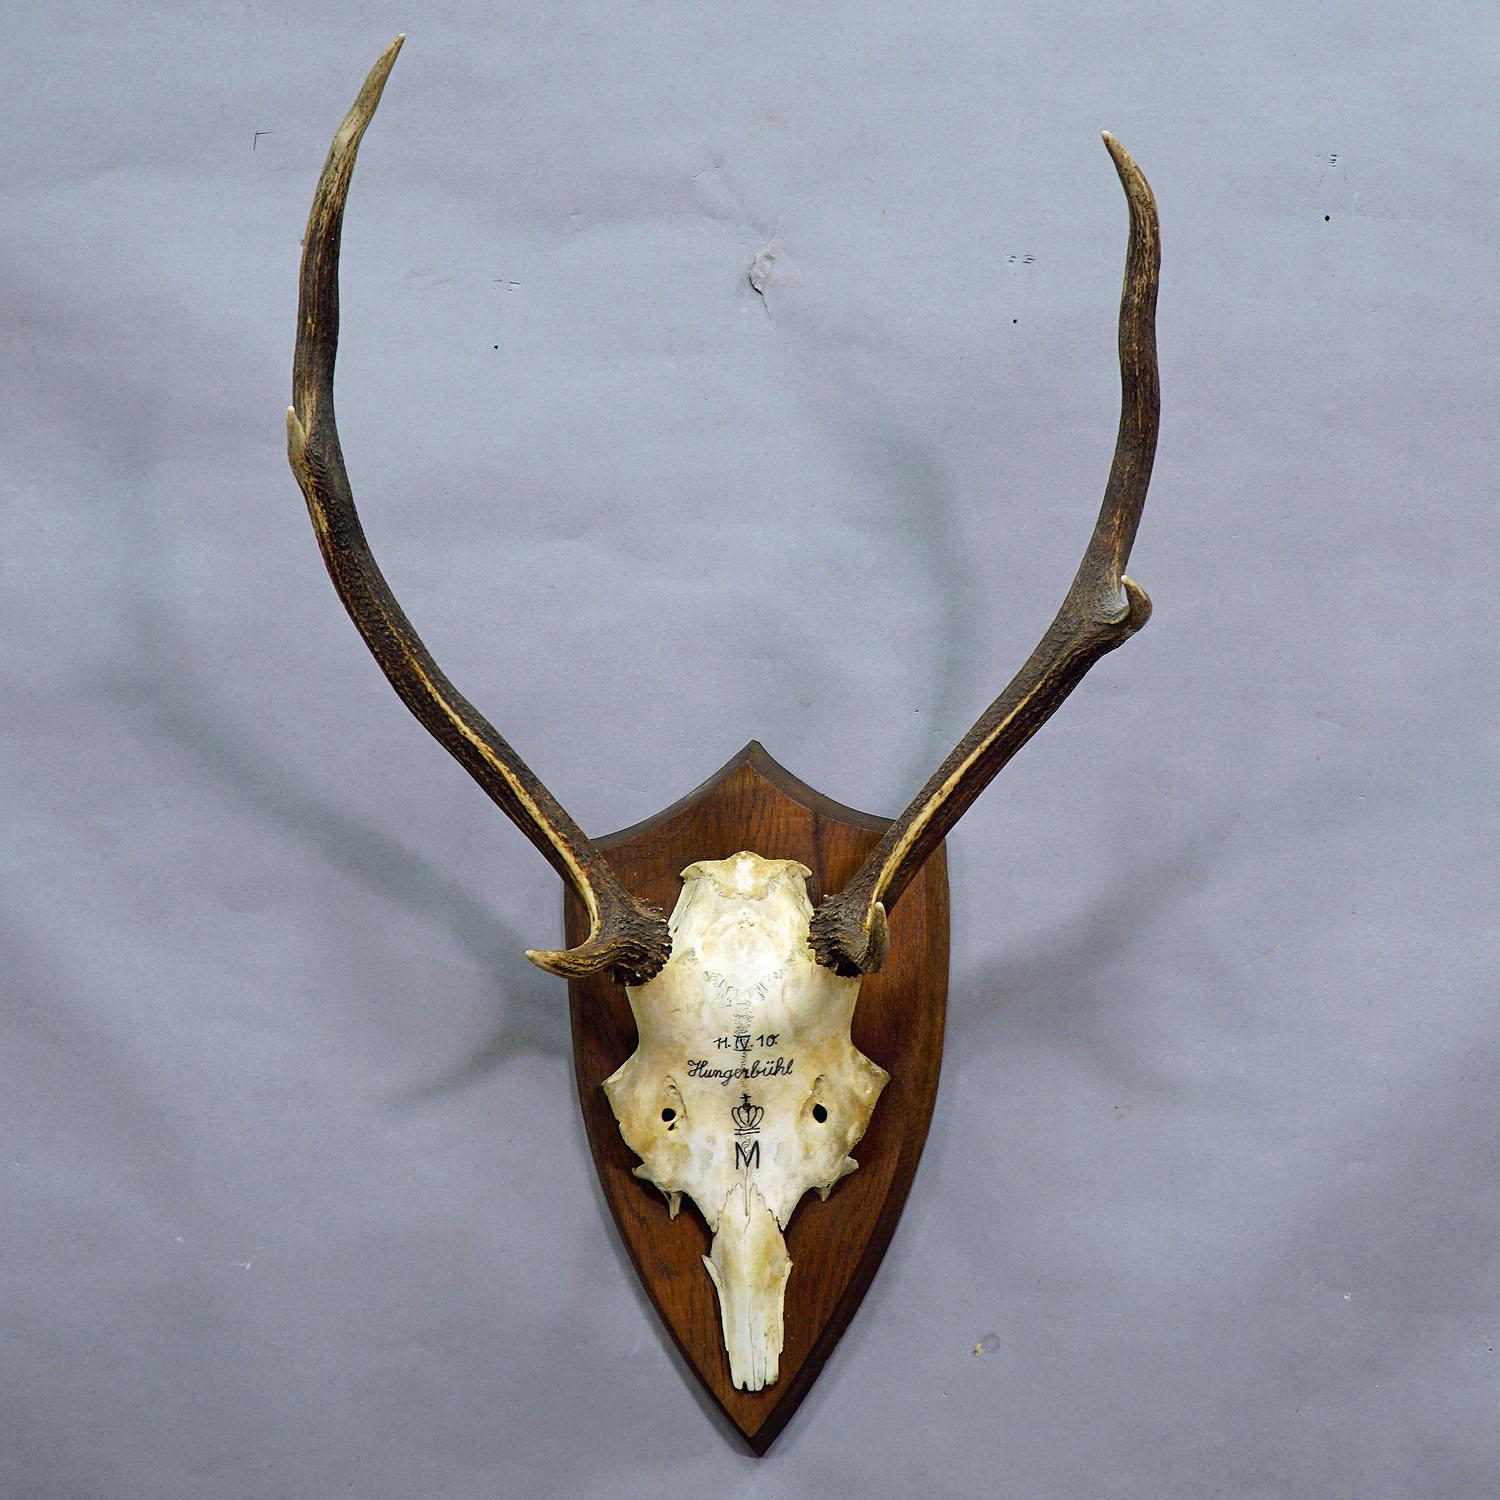 A 6 pointer black forest deer trophy from the palace of salem in south germany. shoot by a member of the lordly family of Baden in 1910. handwritten inscriptions on the skull with, place of the hunt, family crest and date. mounted on a nice wooden